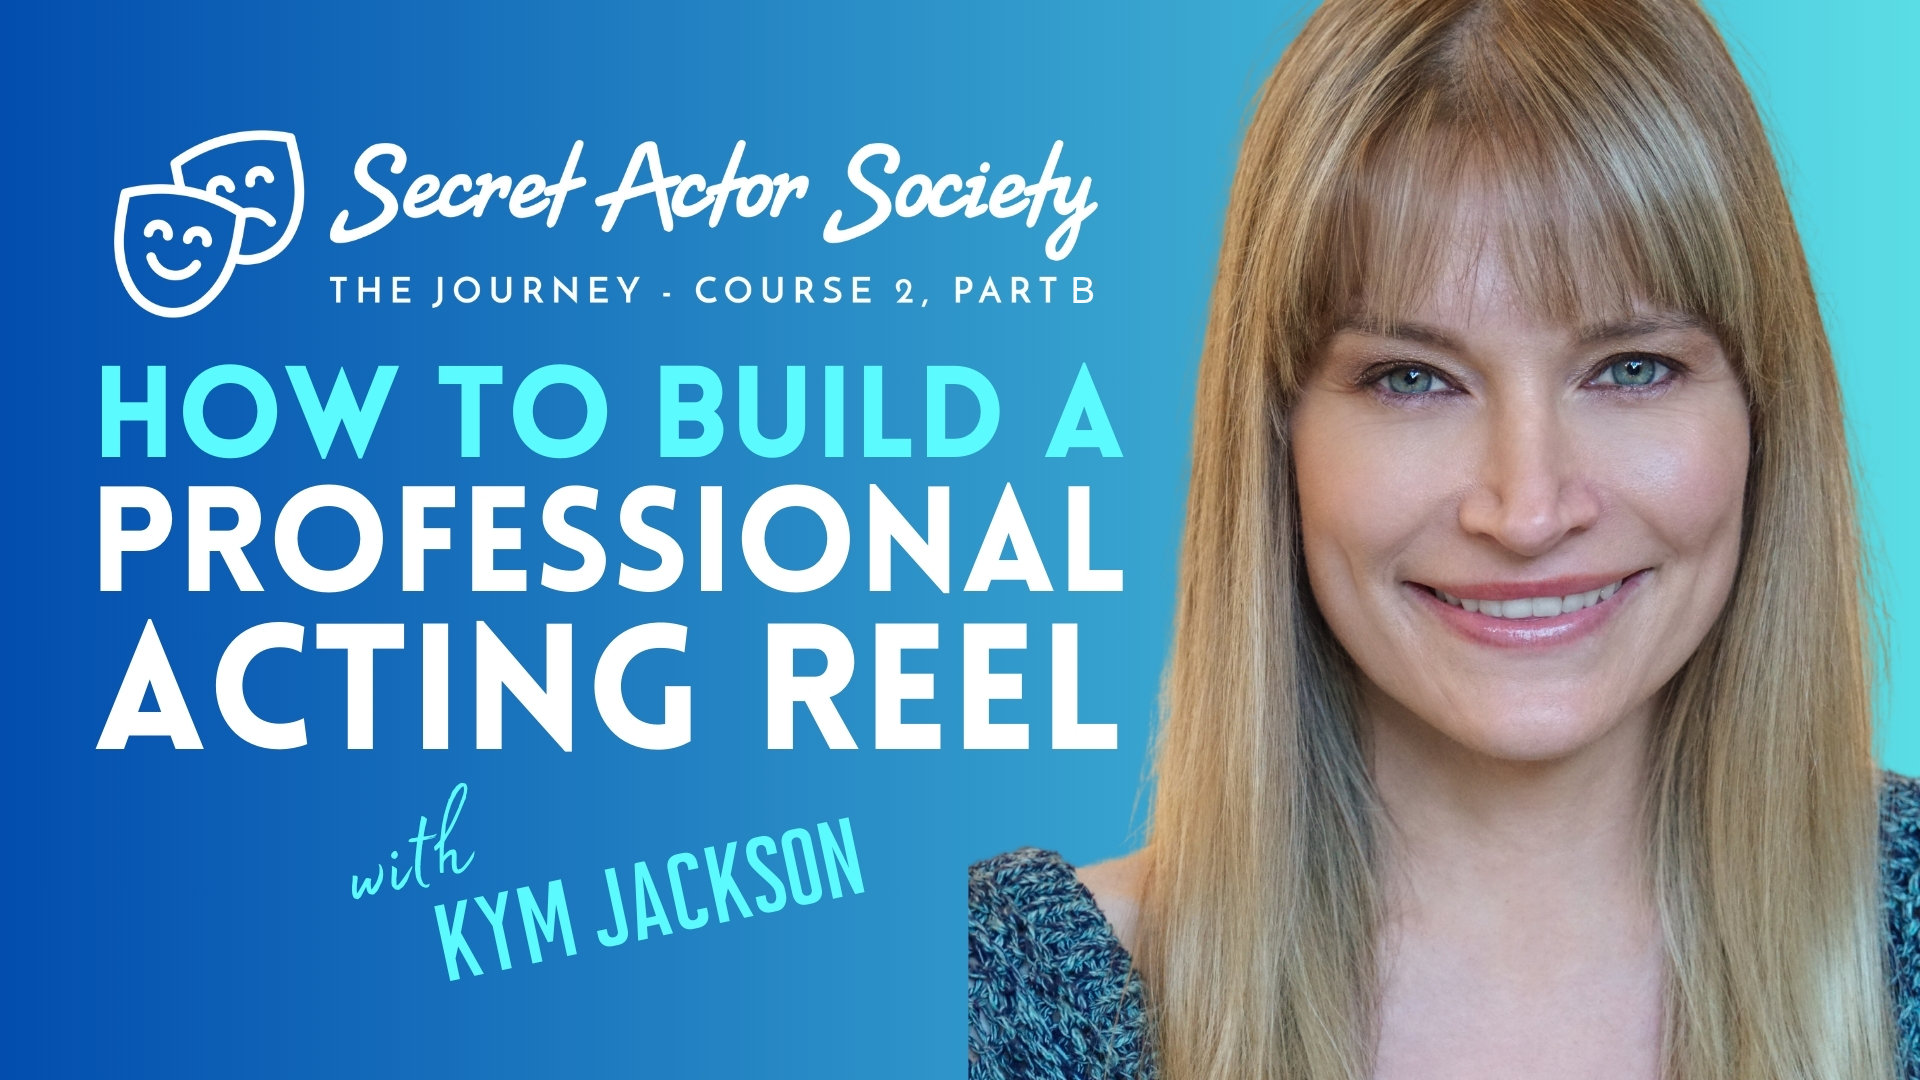 The SAS Journey | Course 2B - How To Build a Professional Acting Reel